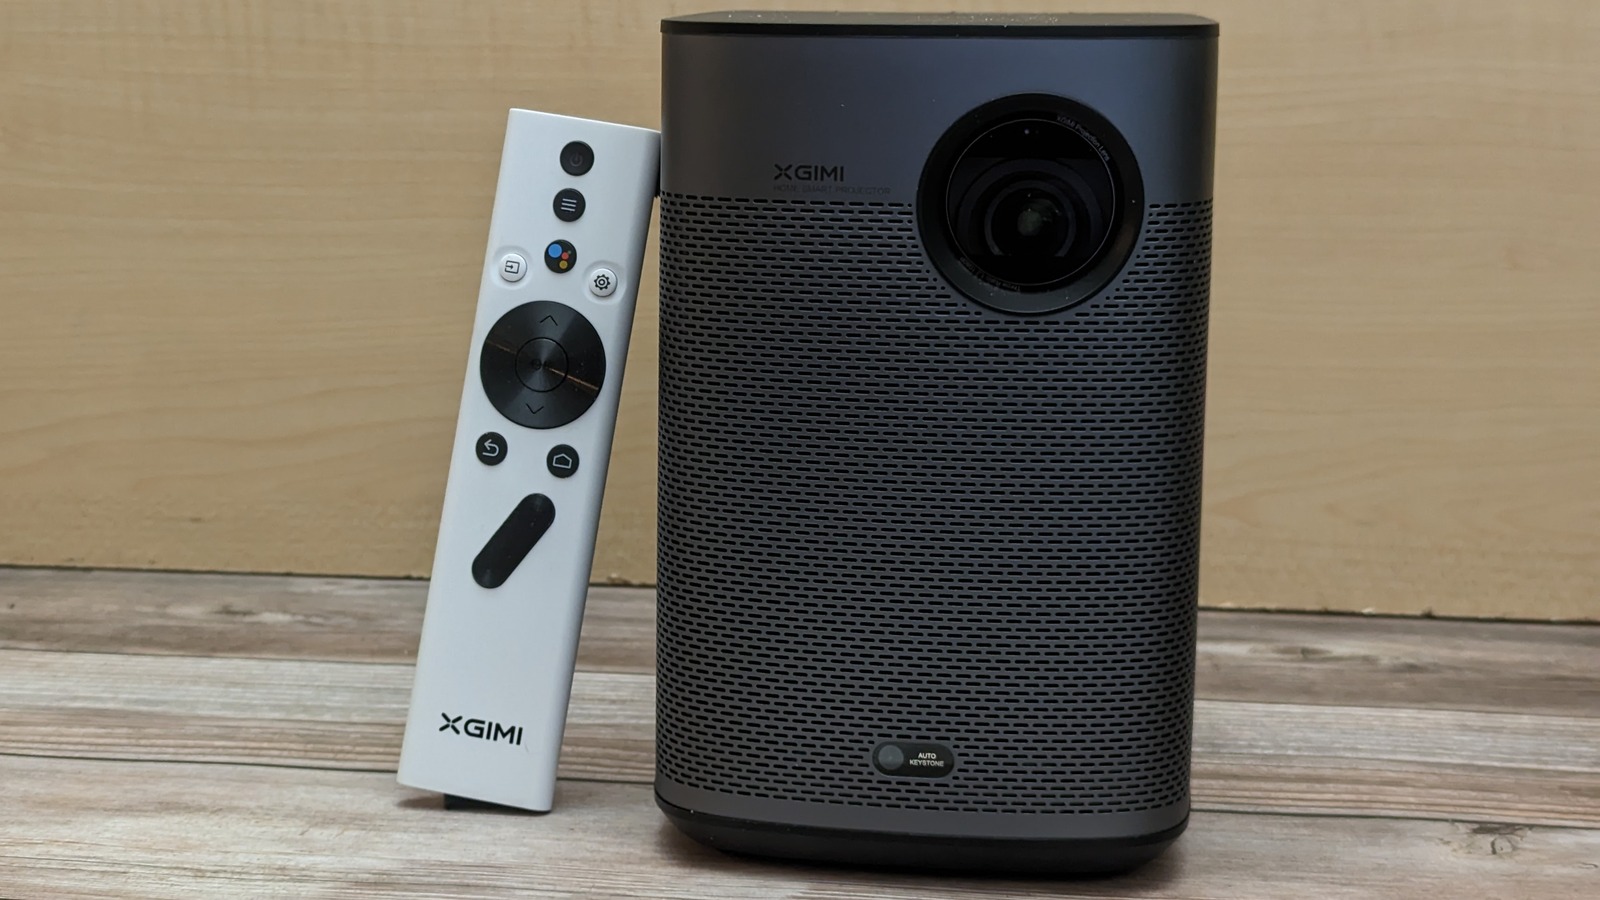 Xgimi Halo Plus Review: Perfectly Portable Smart TV Projector